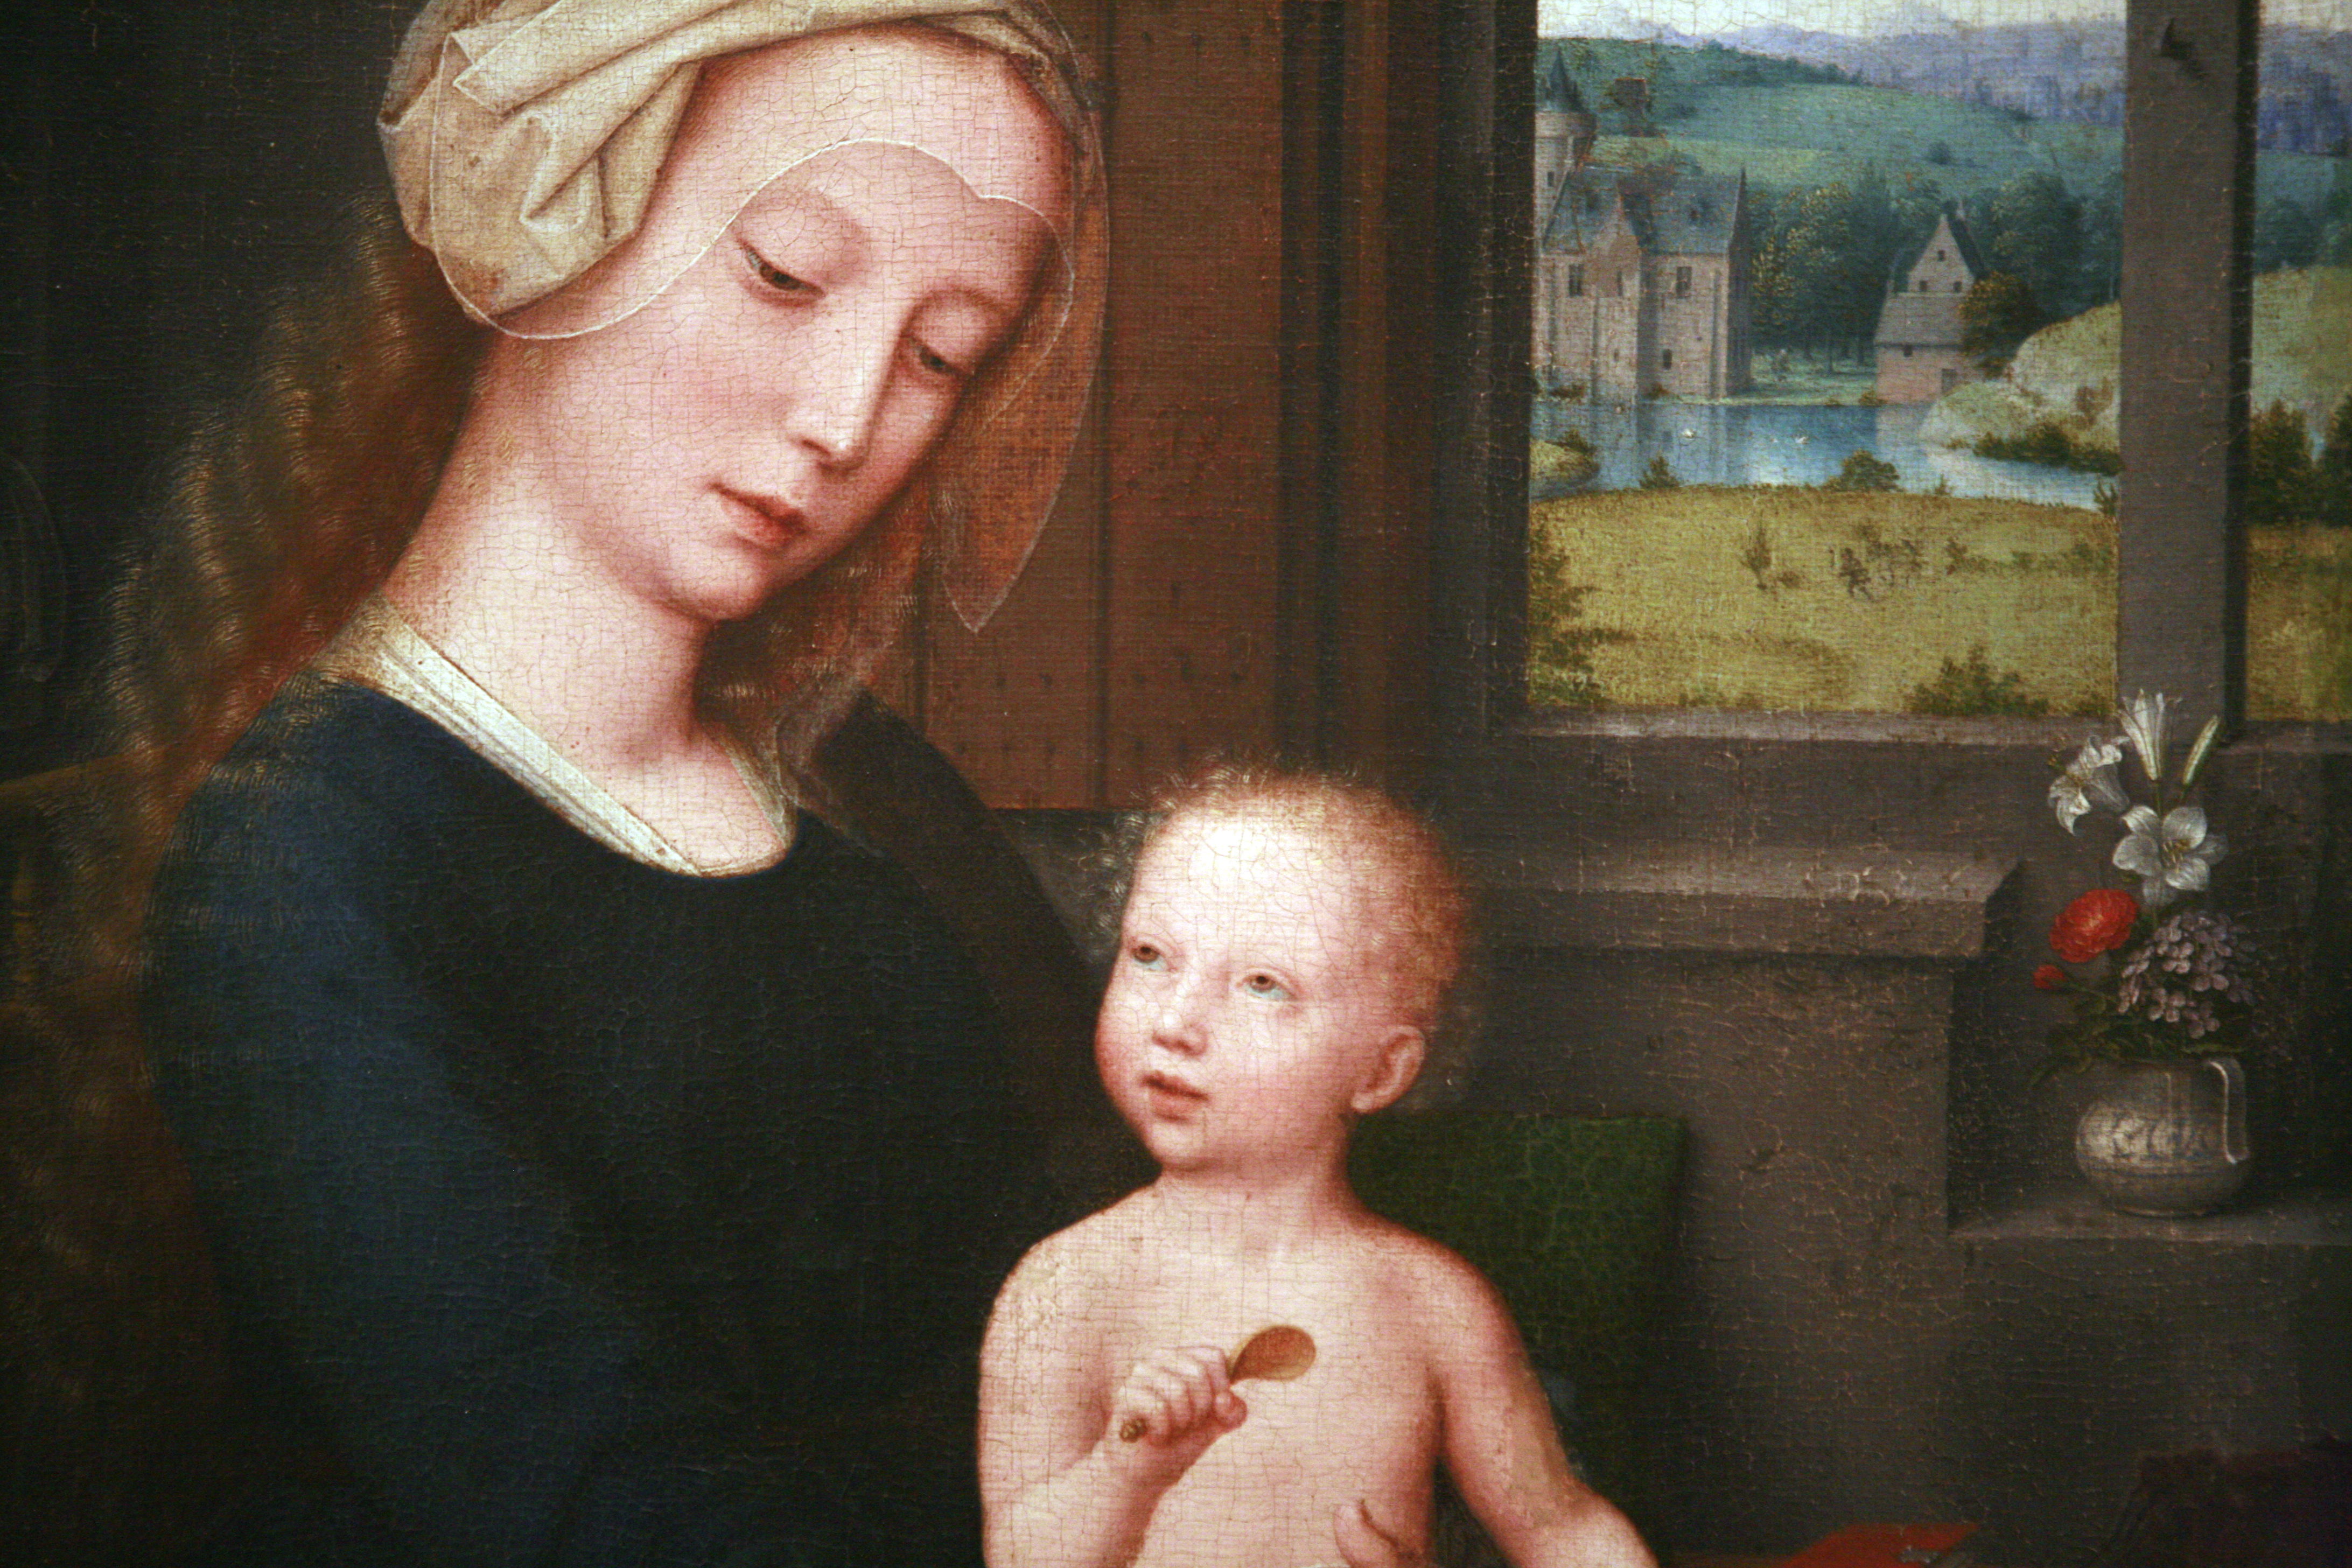 Virgin and Child with the Milk Soup mg 9904